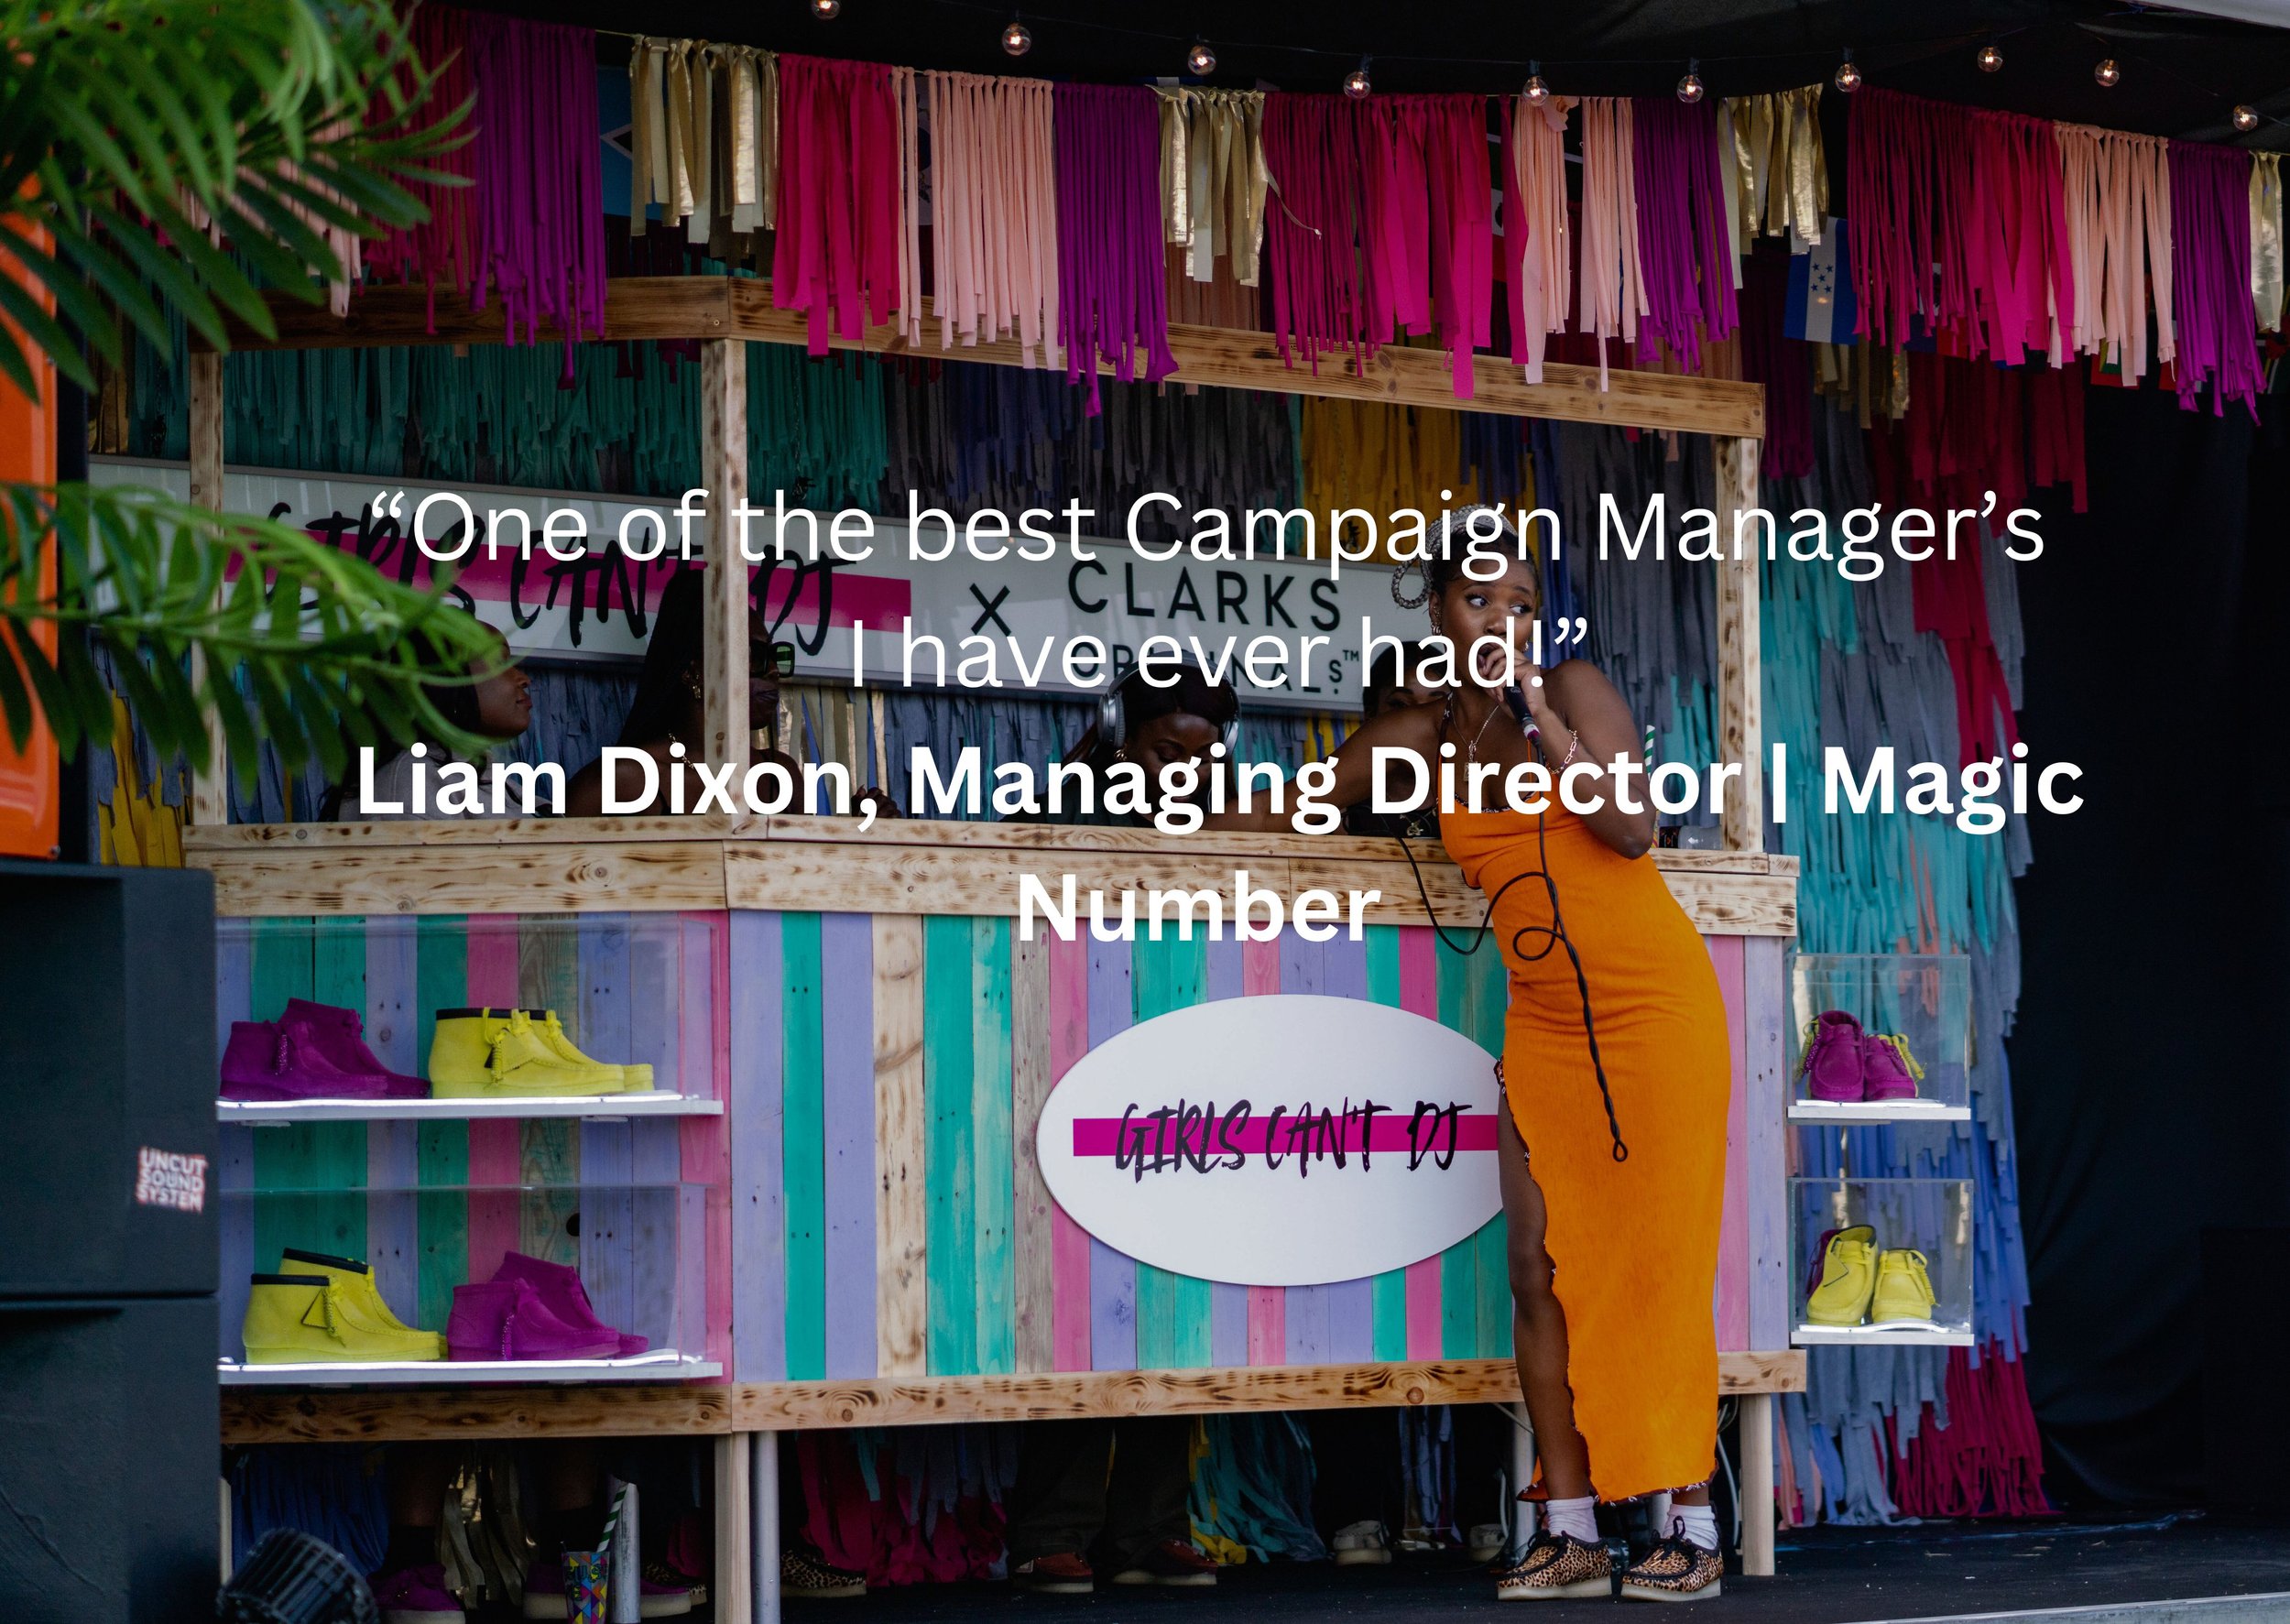 “The best Campaign Manager I have had” Liam Dixon, Managing Director  Magic Number.jpg